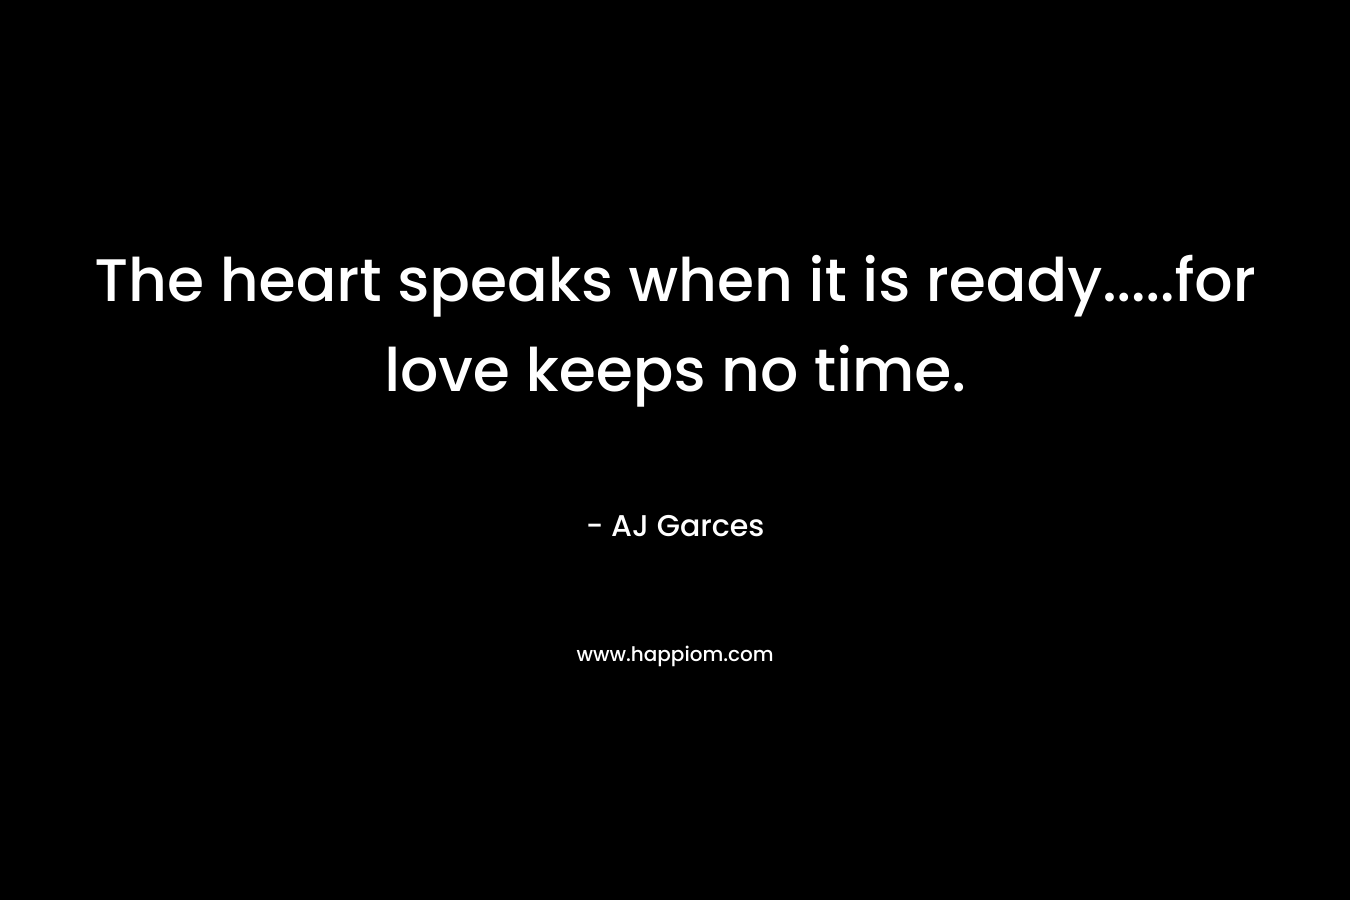 The heart speaks when it is ready.....for love keeps no time.